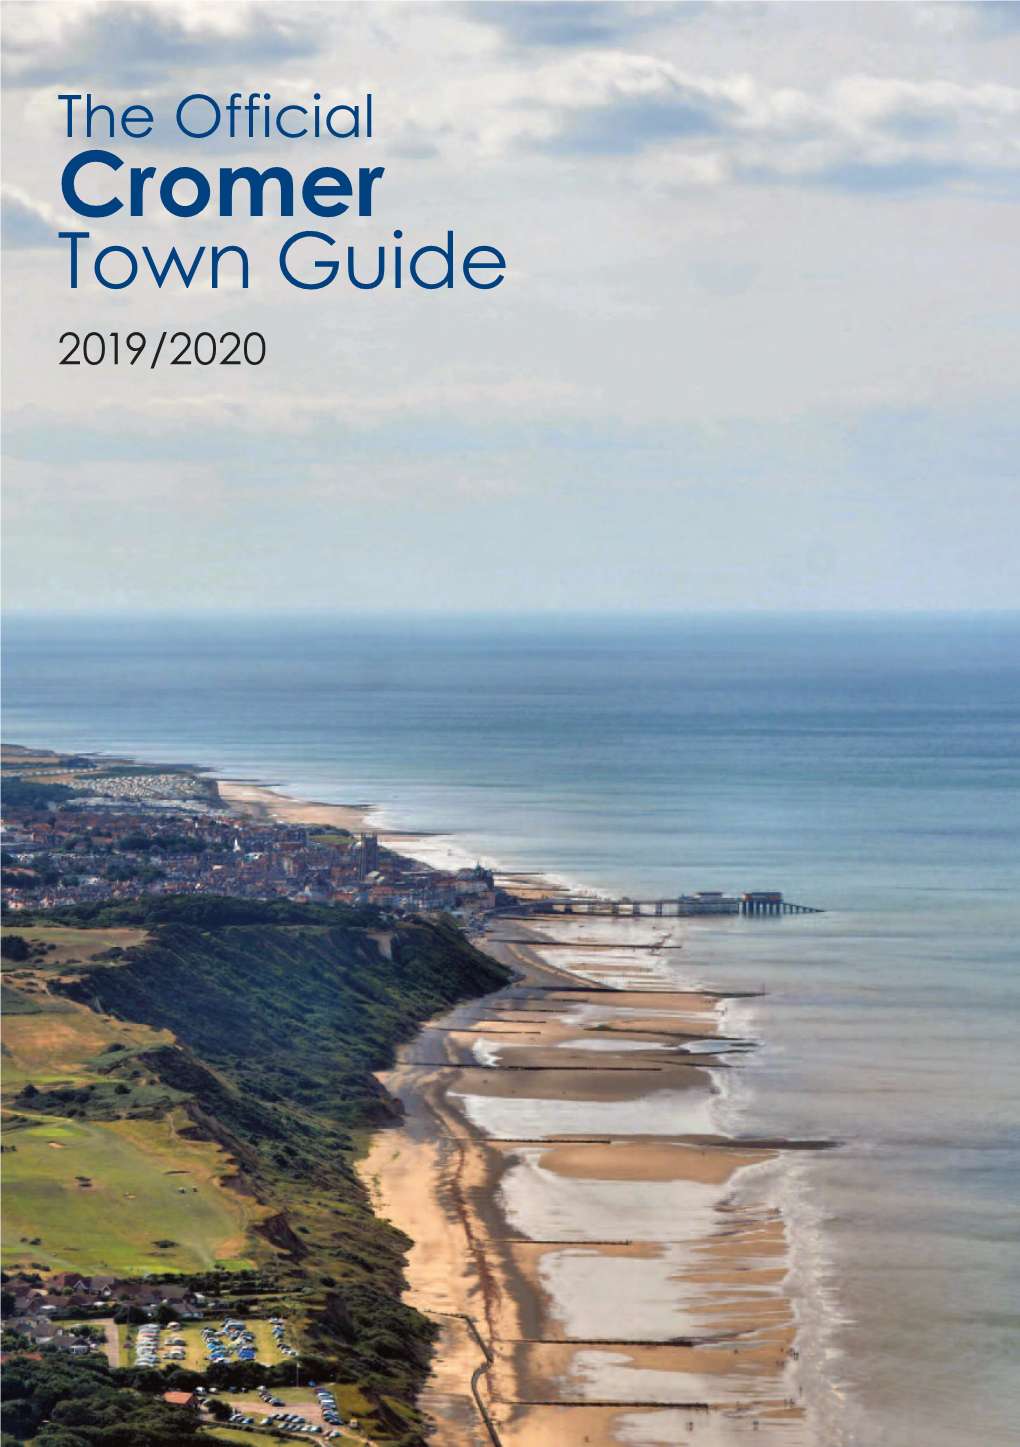 Cromer Town Council and the Cromer Chamber of Trade and Business